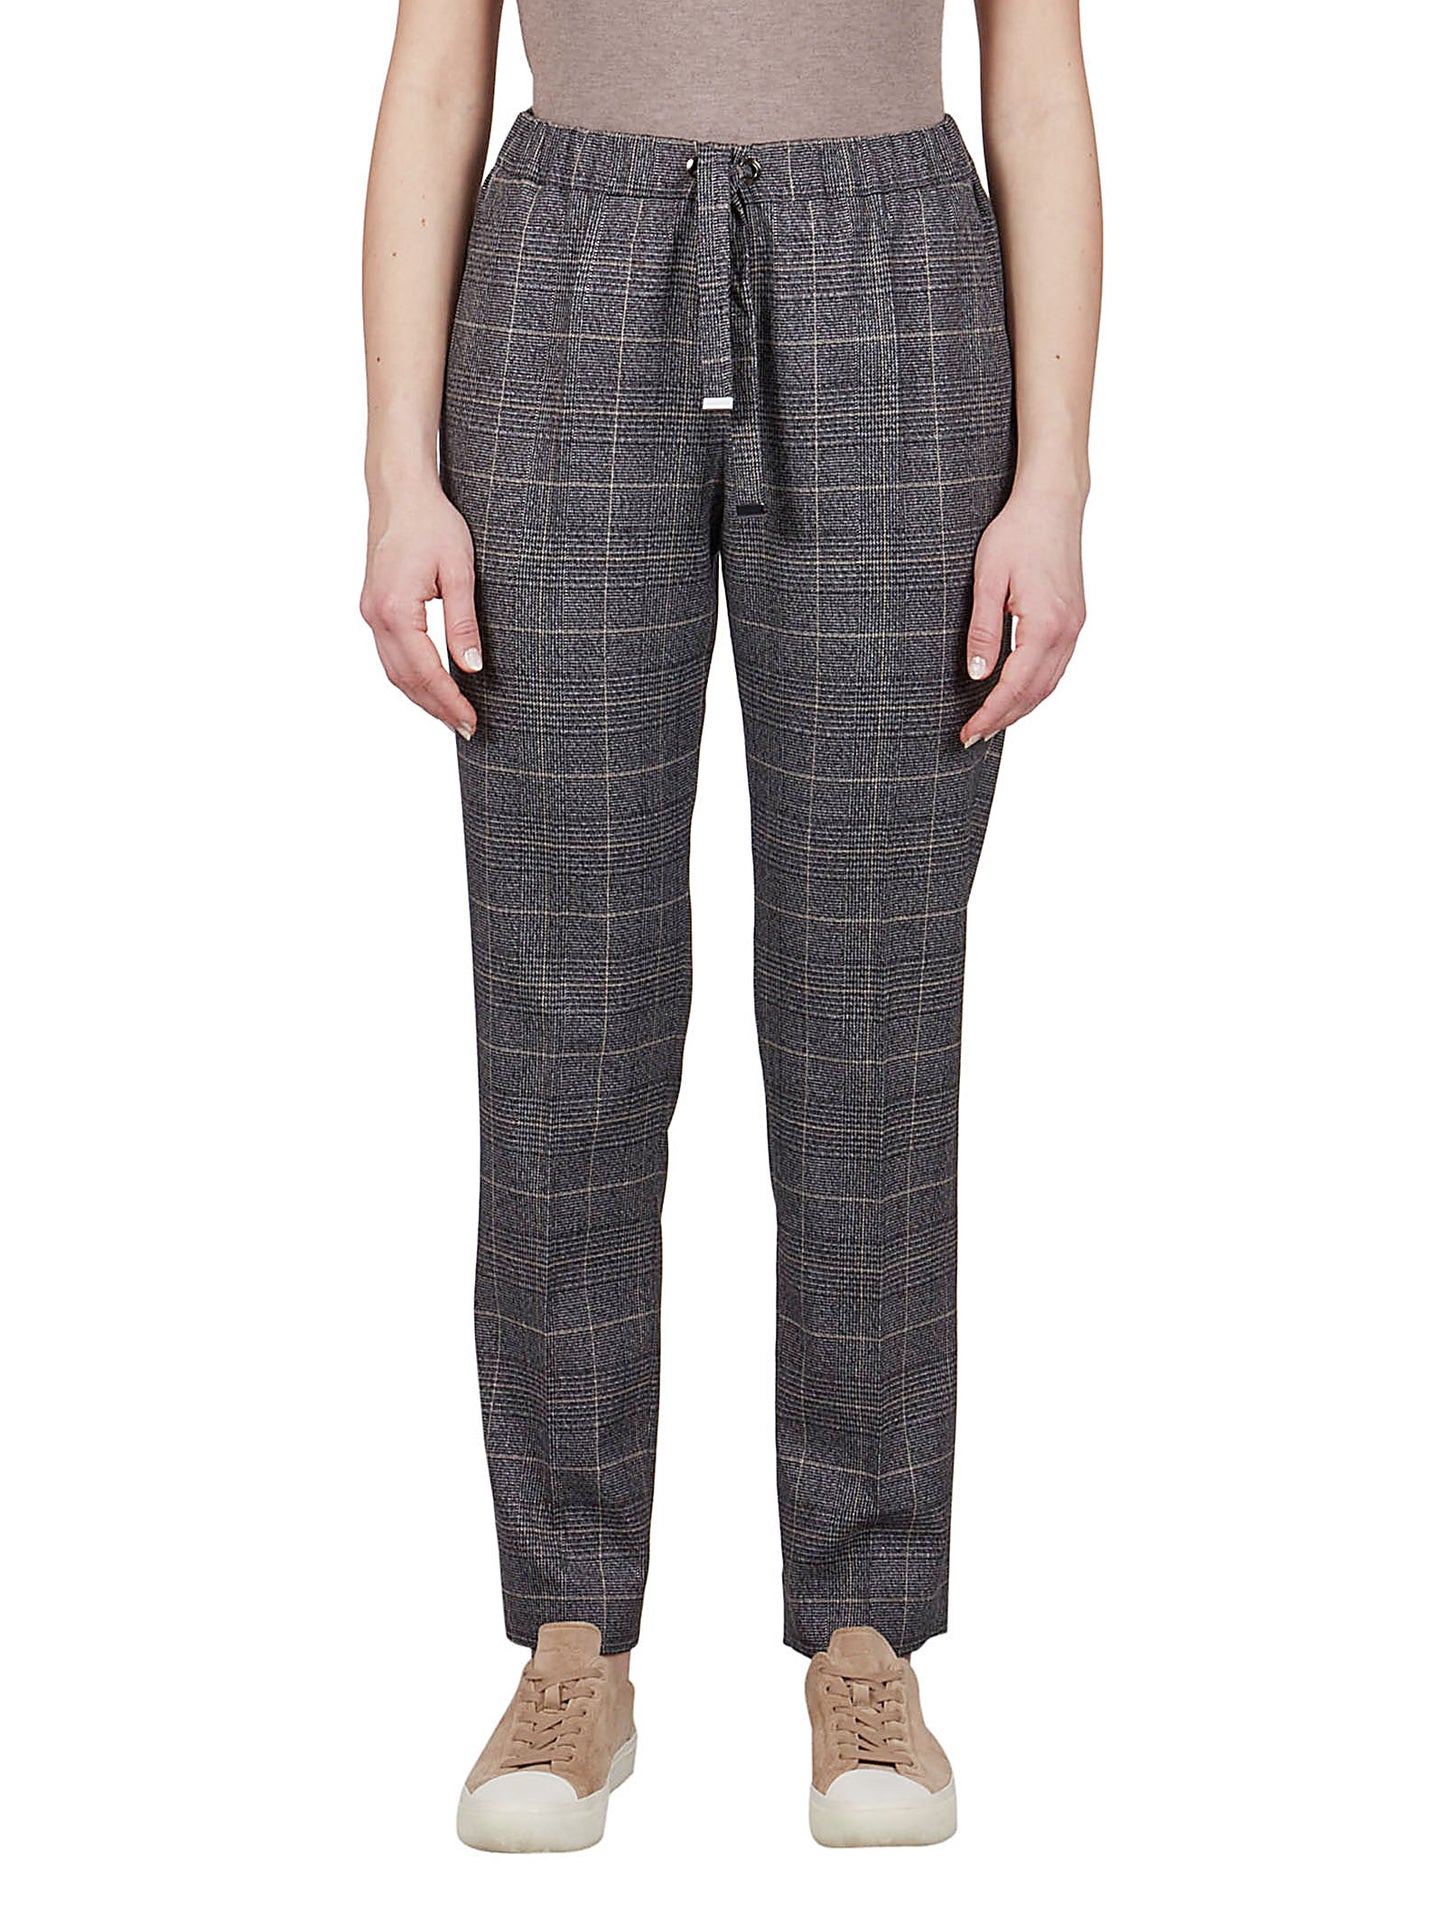 The Checked Dark Grey Drawstring Waist Trousers by Purotatto